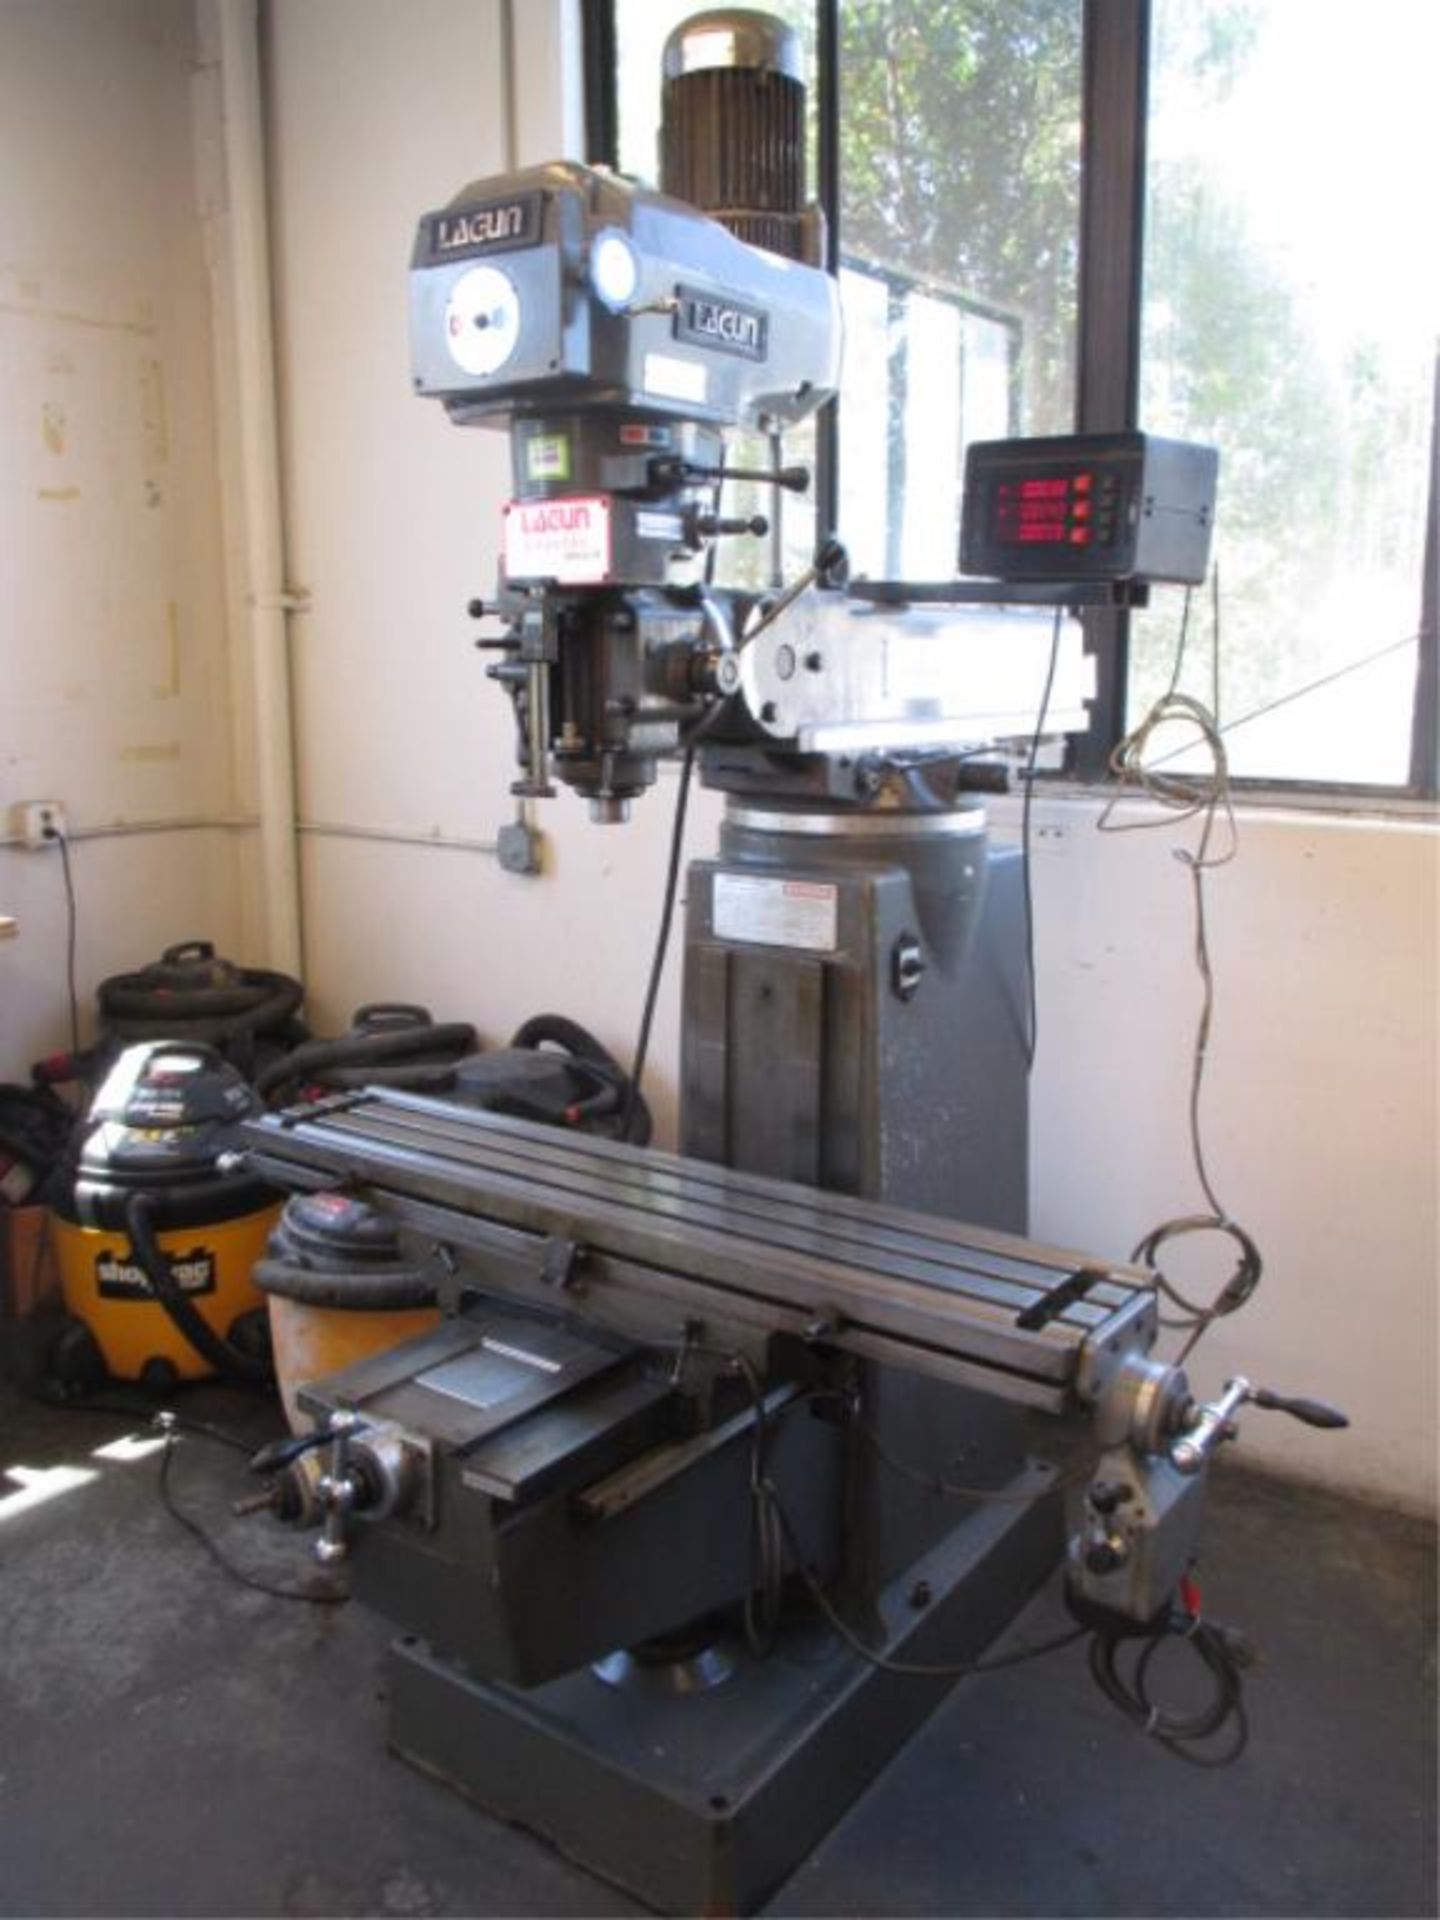 Knee Mill. Lagun FTV-2S 2HP Ram Type Vertical Mill. Table: 50"x 10"; Travel 30" X-Axis / 16" Y-